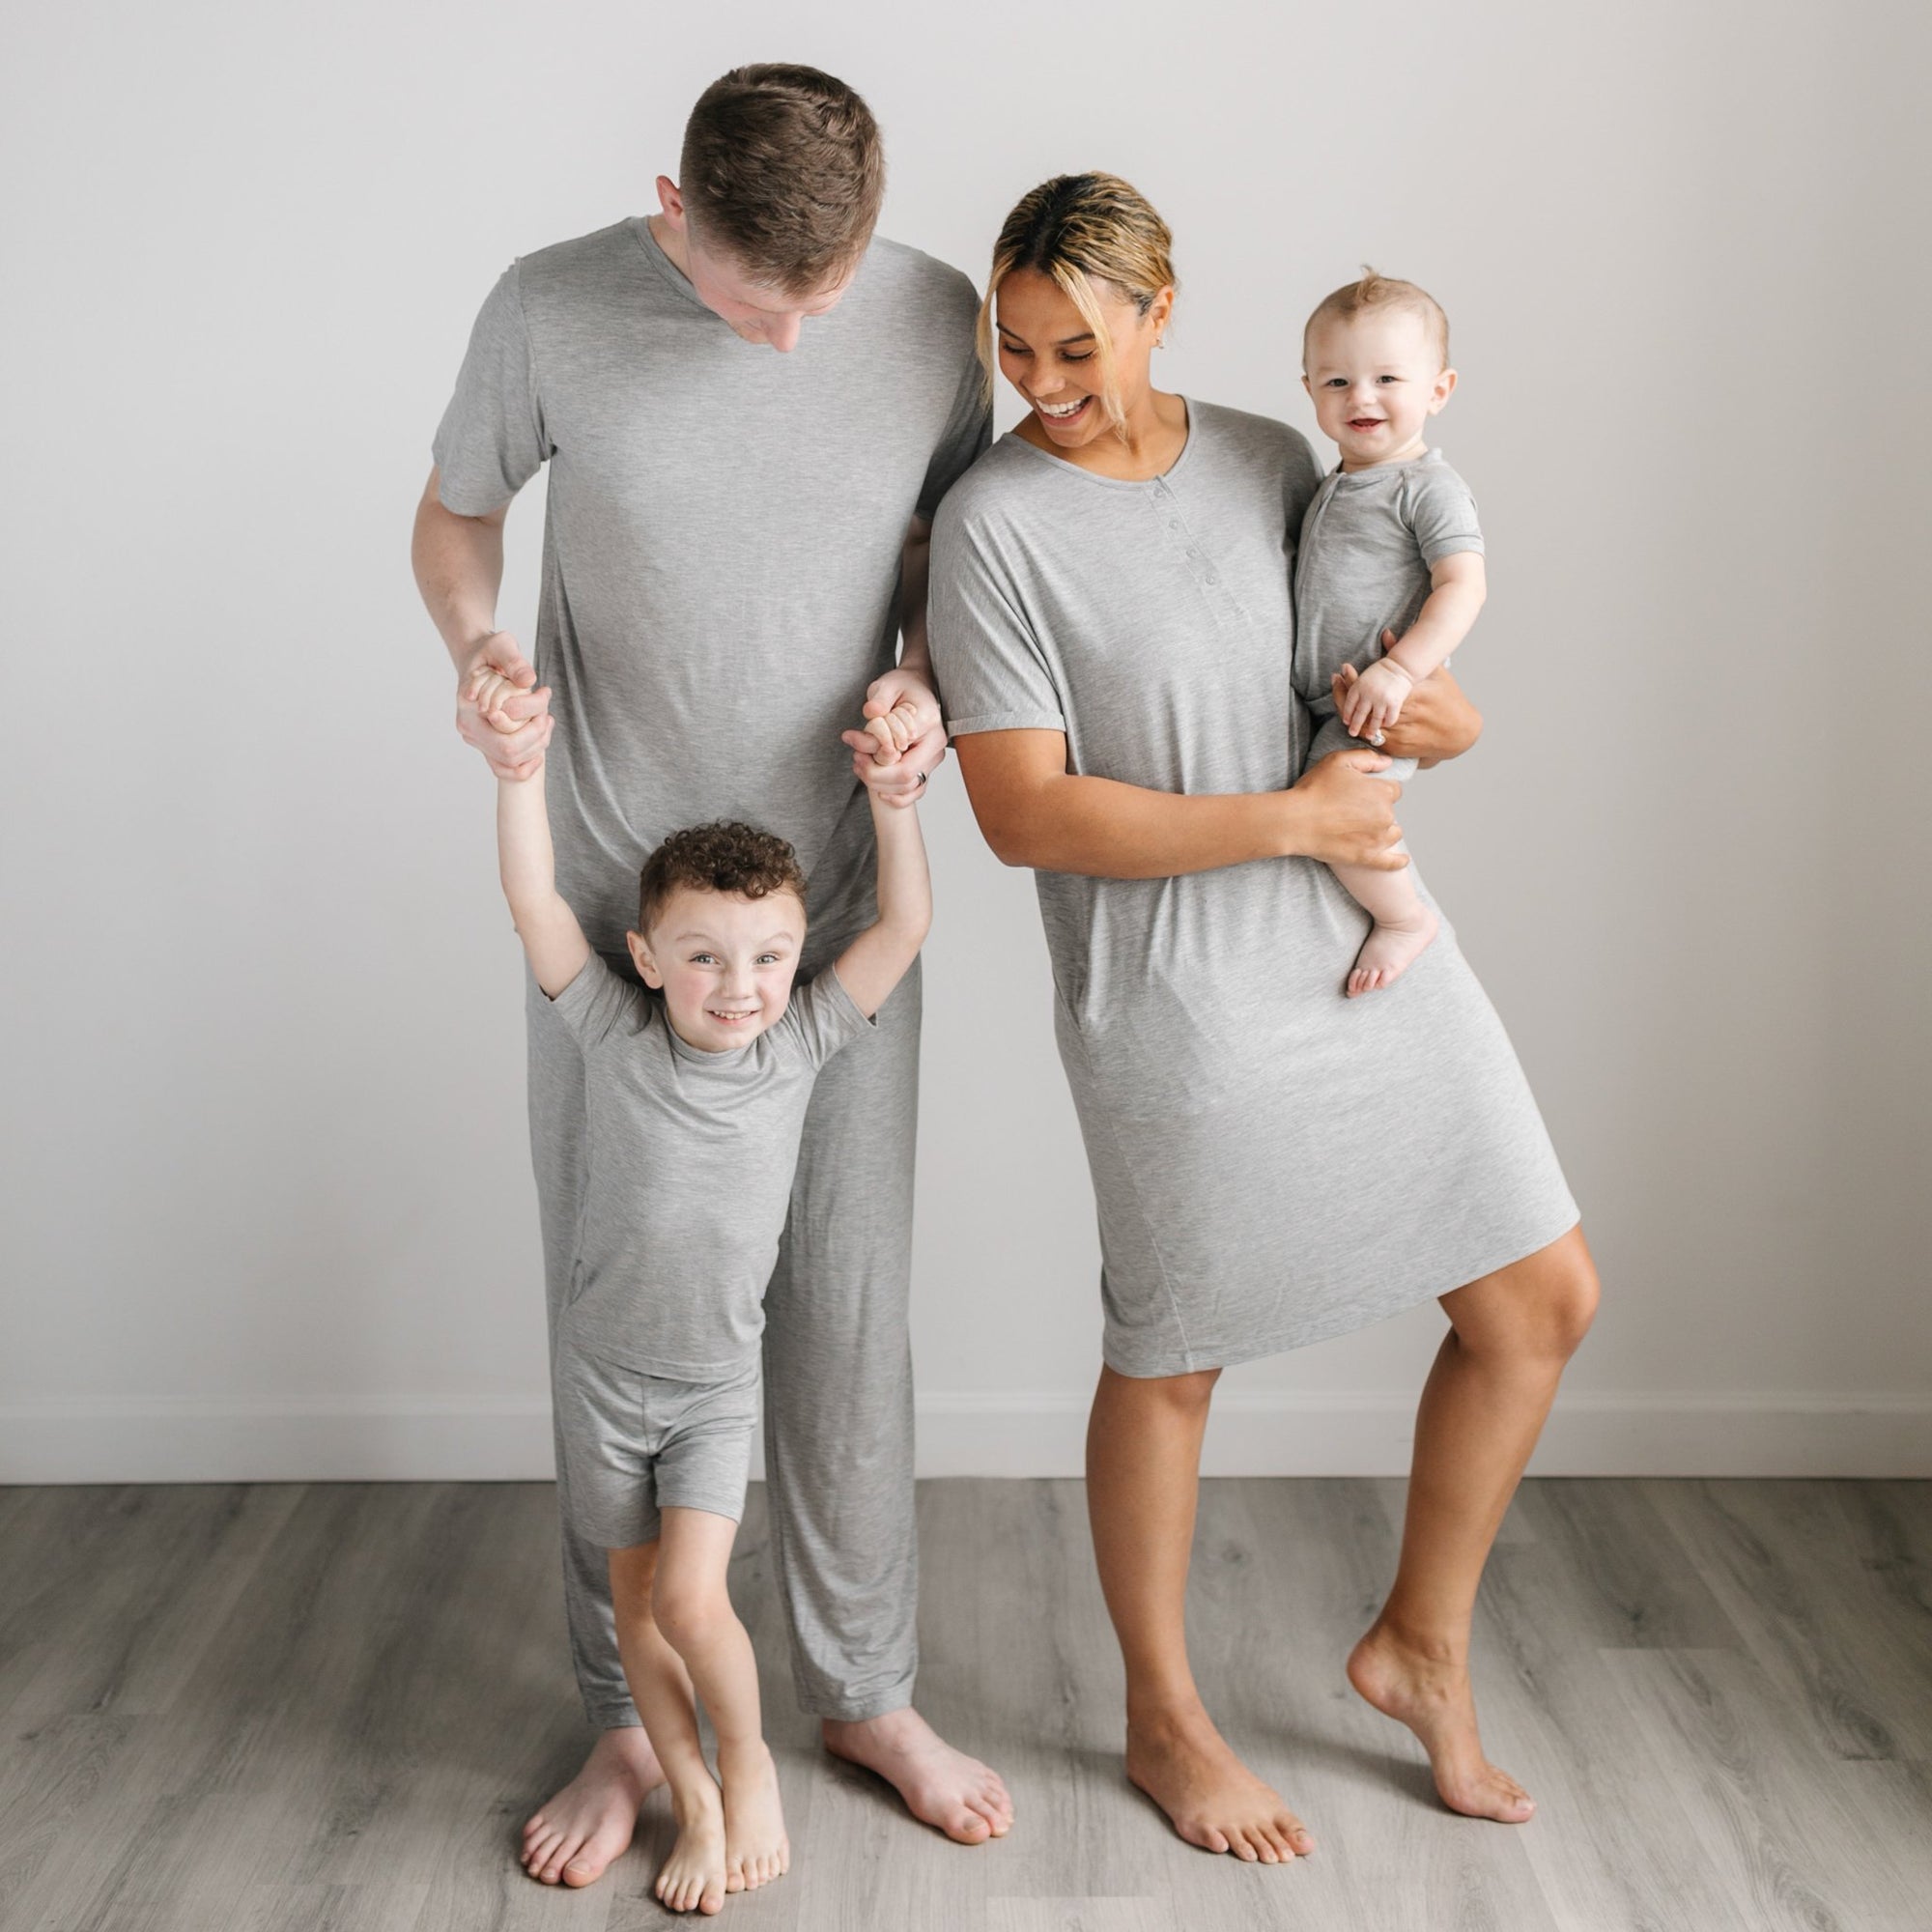 Image of family of four shown wearing matching solid heather gray pajamas. The dad is shown wearing a short sleeve pj top and pants, the mom is shown wearing a short sleeve caftan gown, one son is shown wearing a short sleeve and shorts pj set, while the other son is shown wearing a short sleeve and shorts zip up romper.